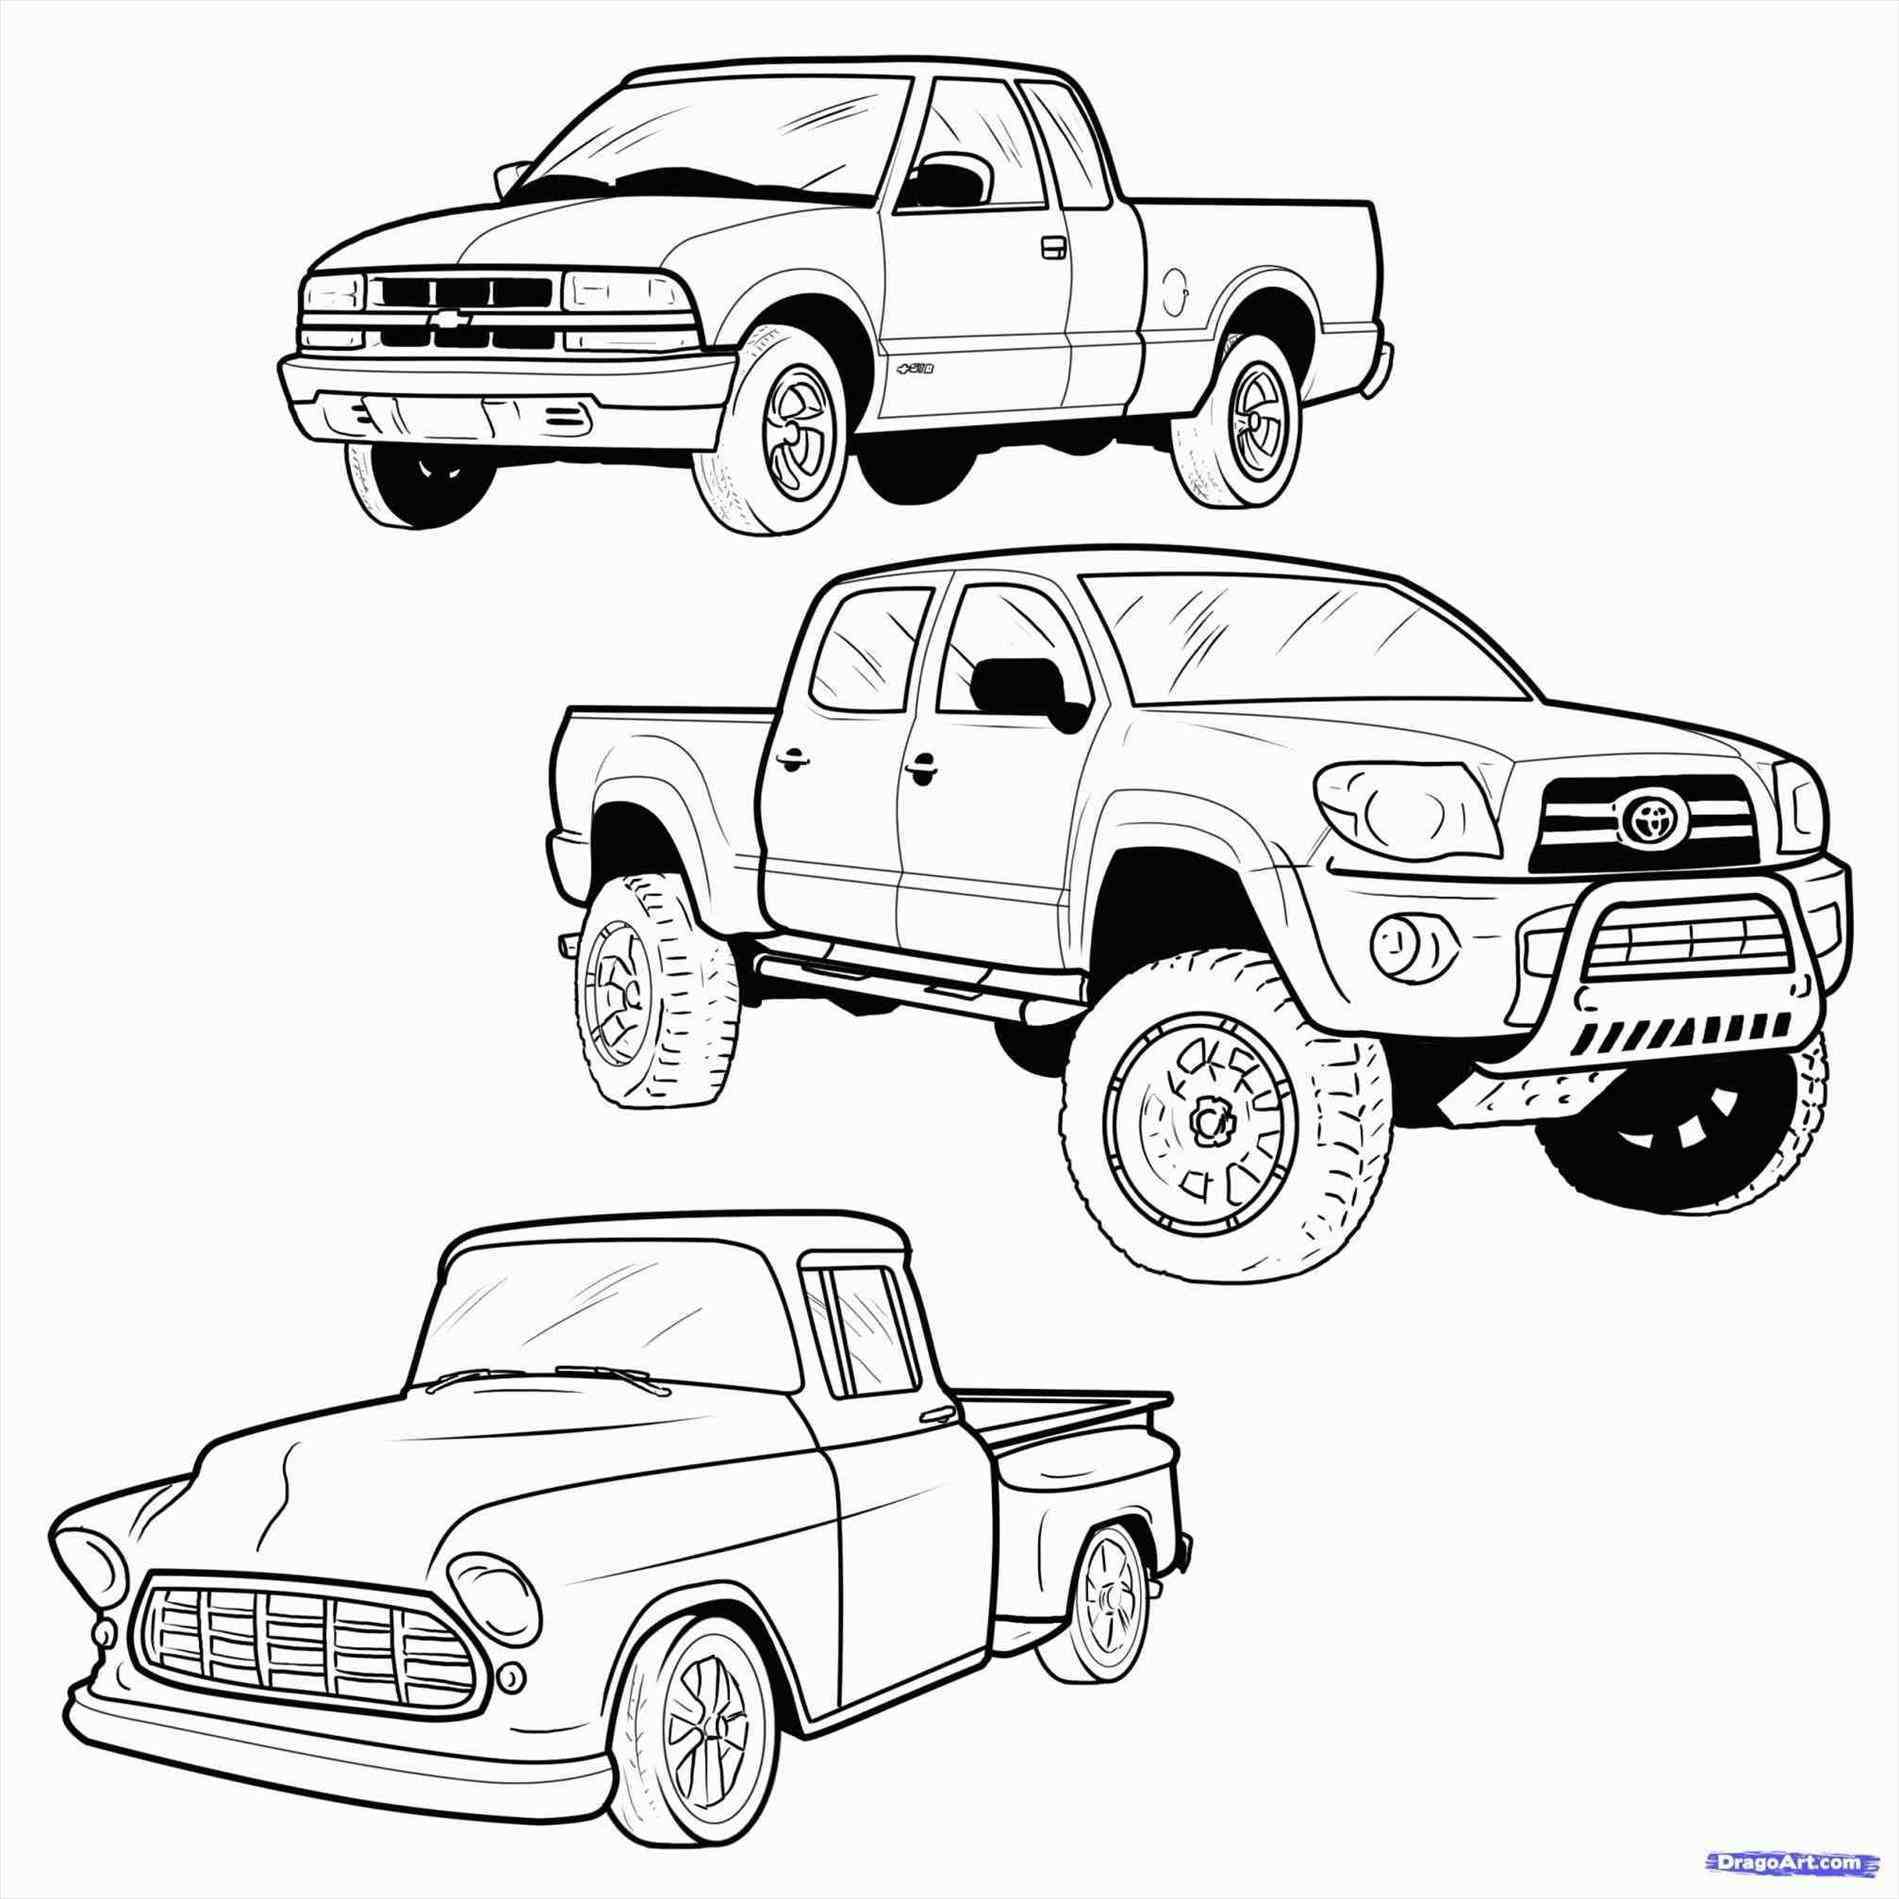 Lifted Truck Coloring Pages At Getcolorings.com | Free Printable